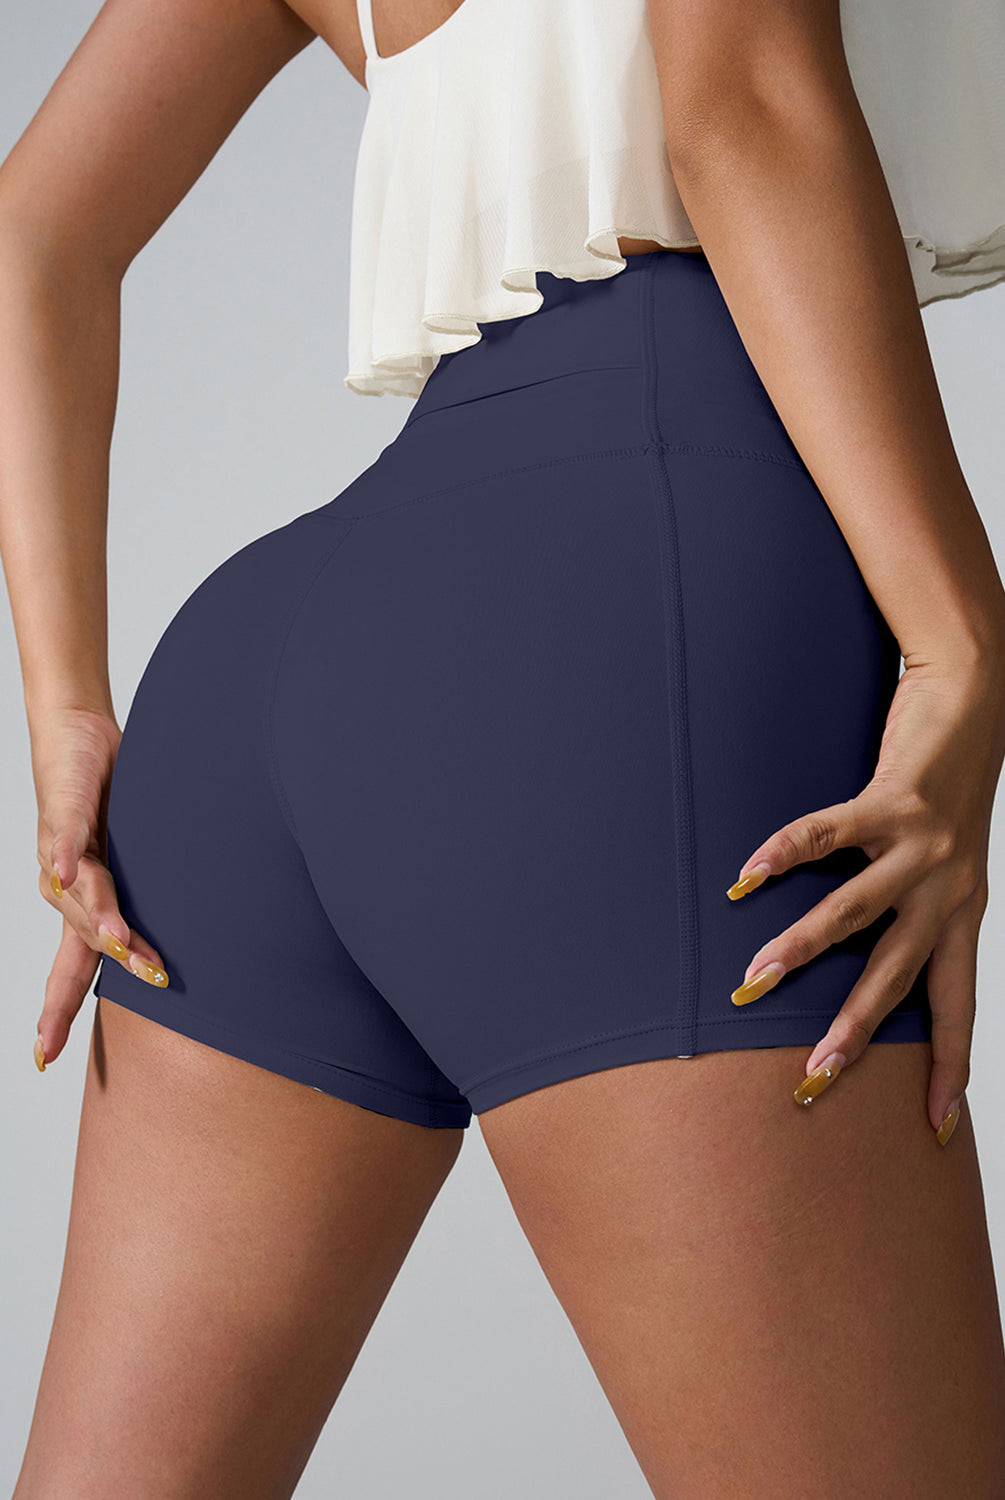 Active woman in GemThreads Boutique's high-waisted active shorts, with phone tucked in back pocket.